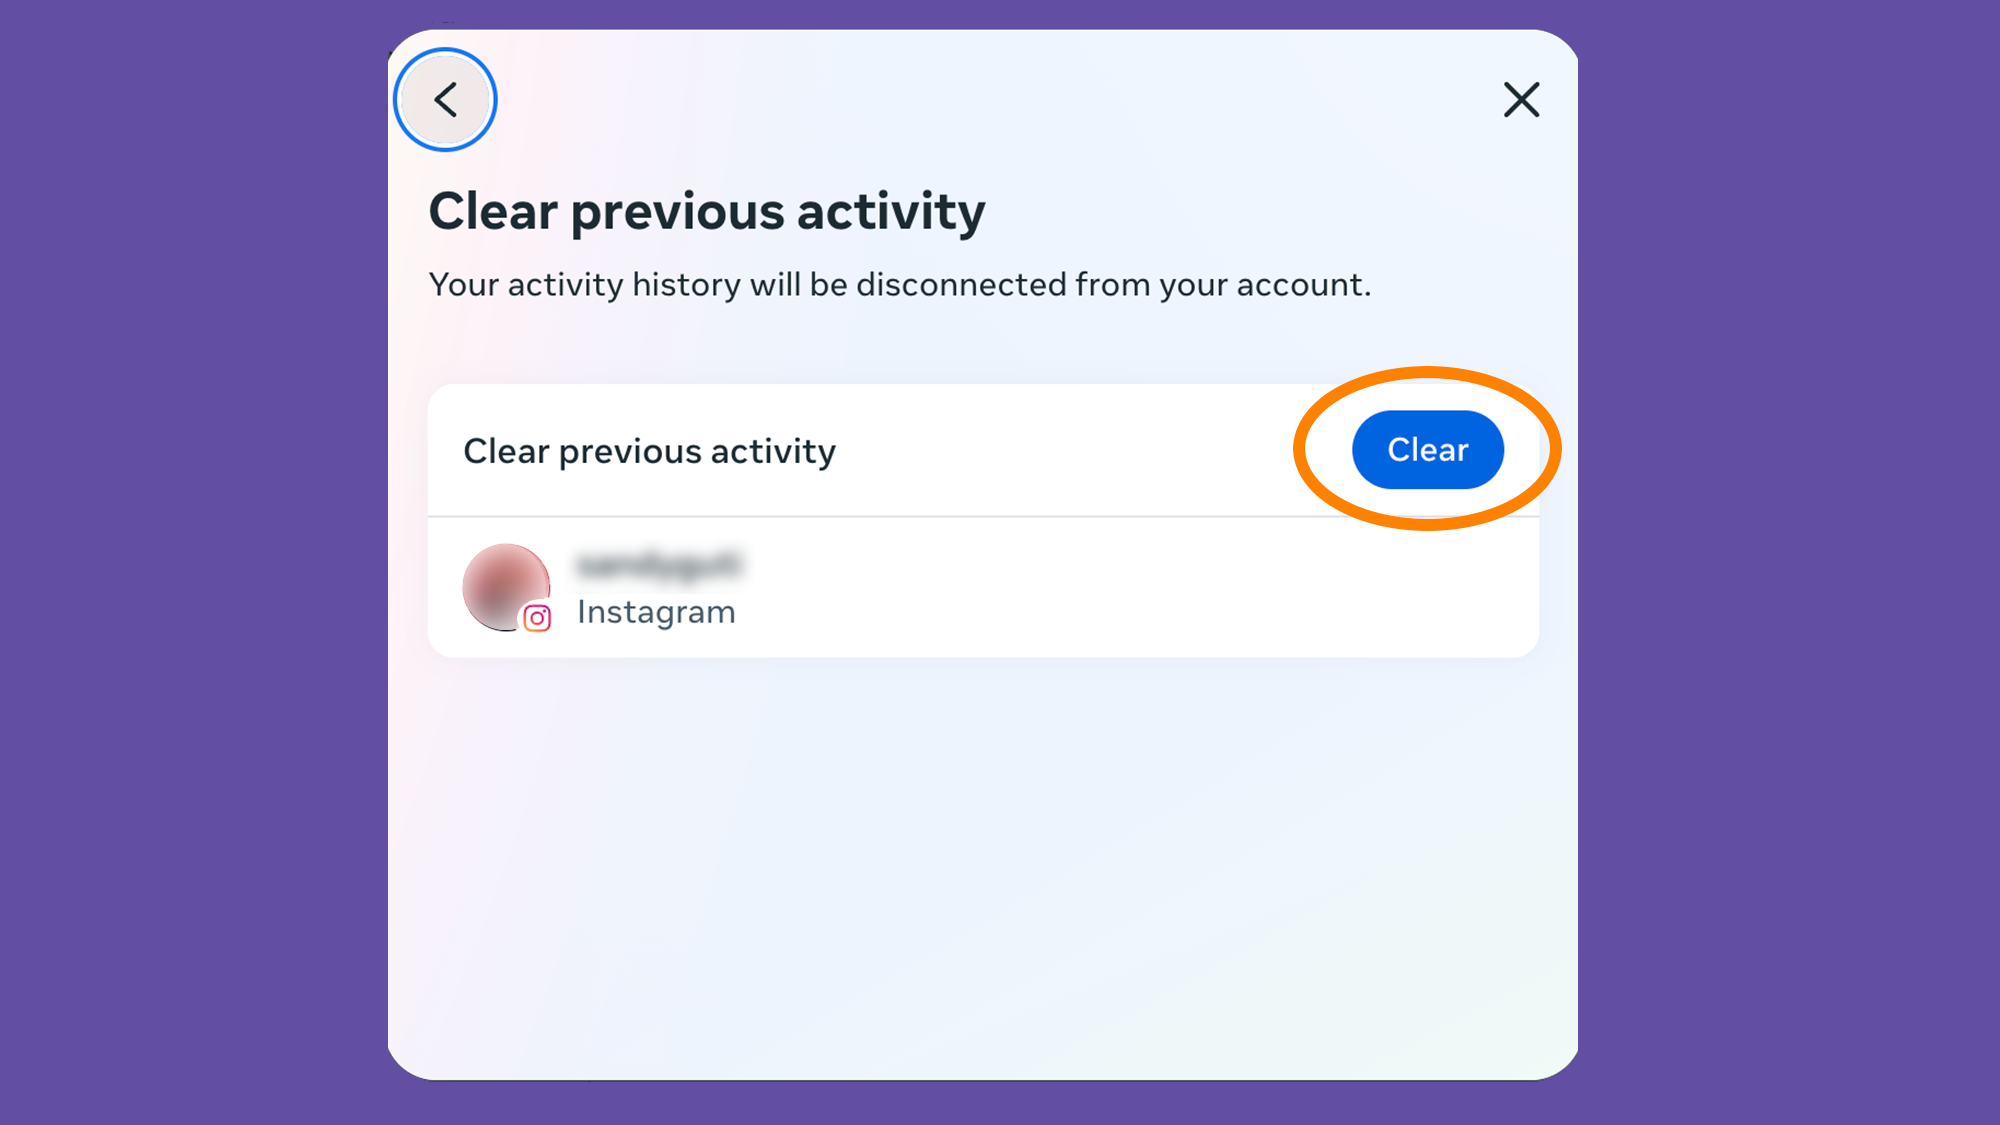 The Clear third party activity menu on Instagram